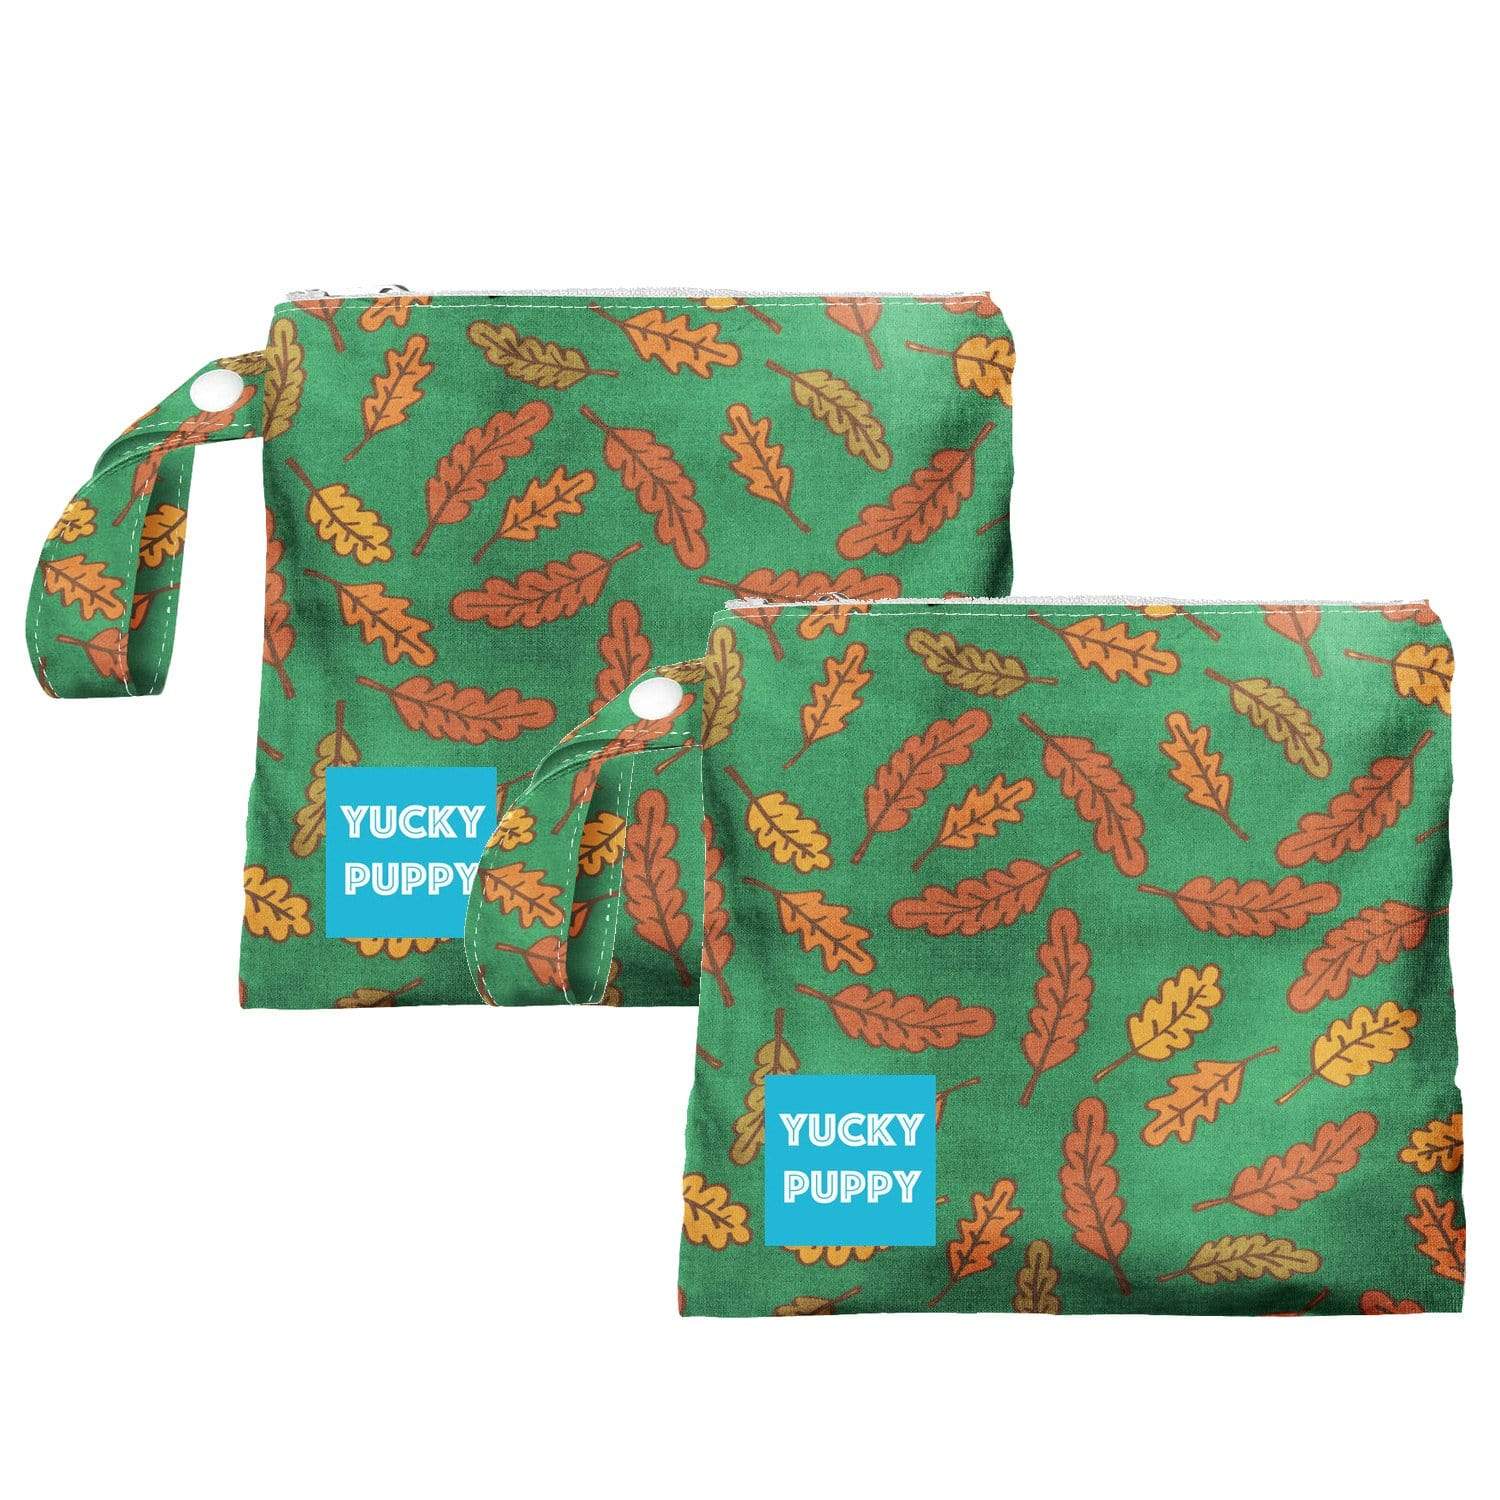 Yucky Puppy Standard + XL Fall Leaves Dog Poop Bag Holders (Set of 2 Bags)